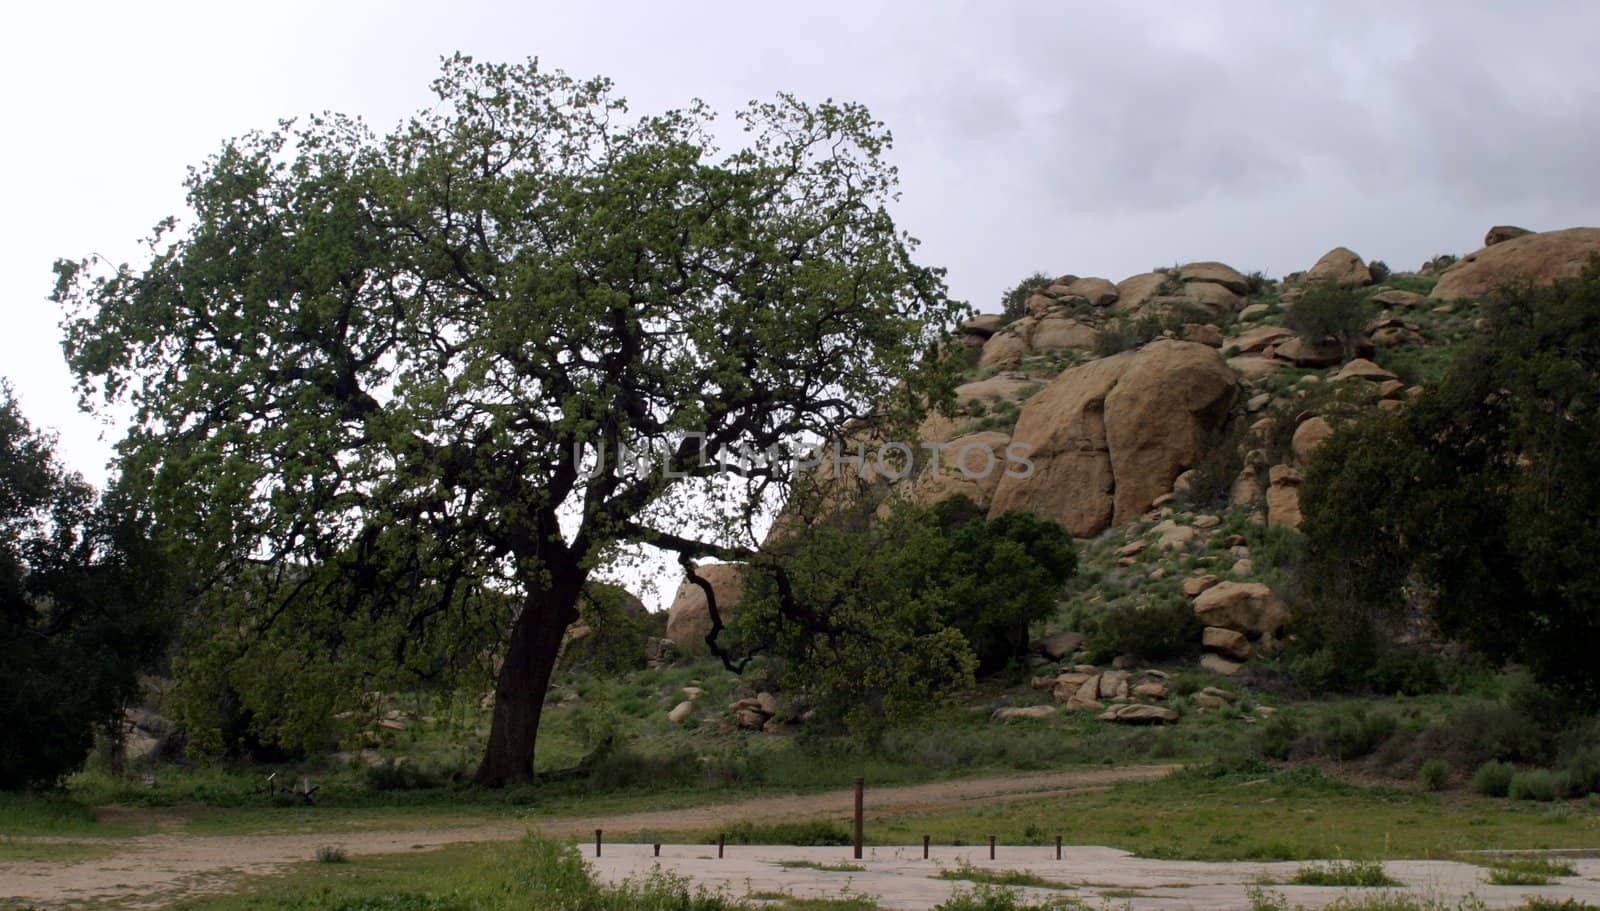 Santa Susana Mountains is a tourist destination for fans of old western movies.